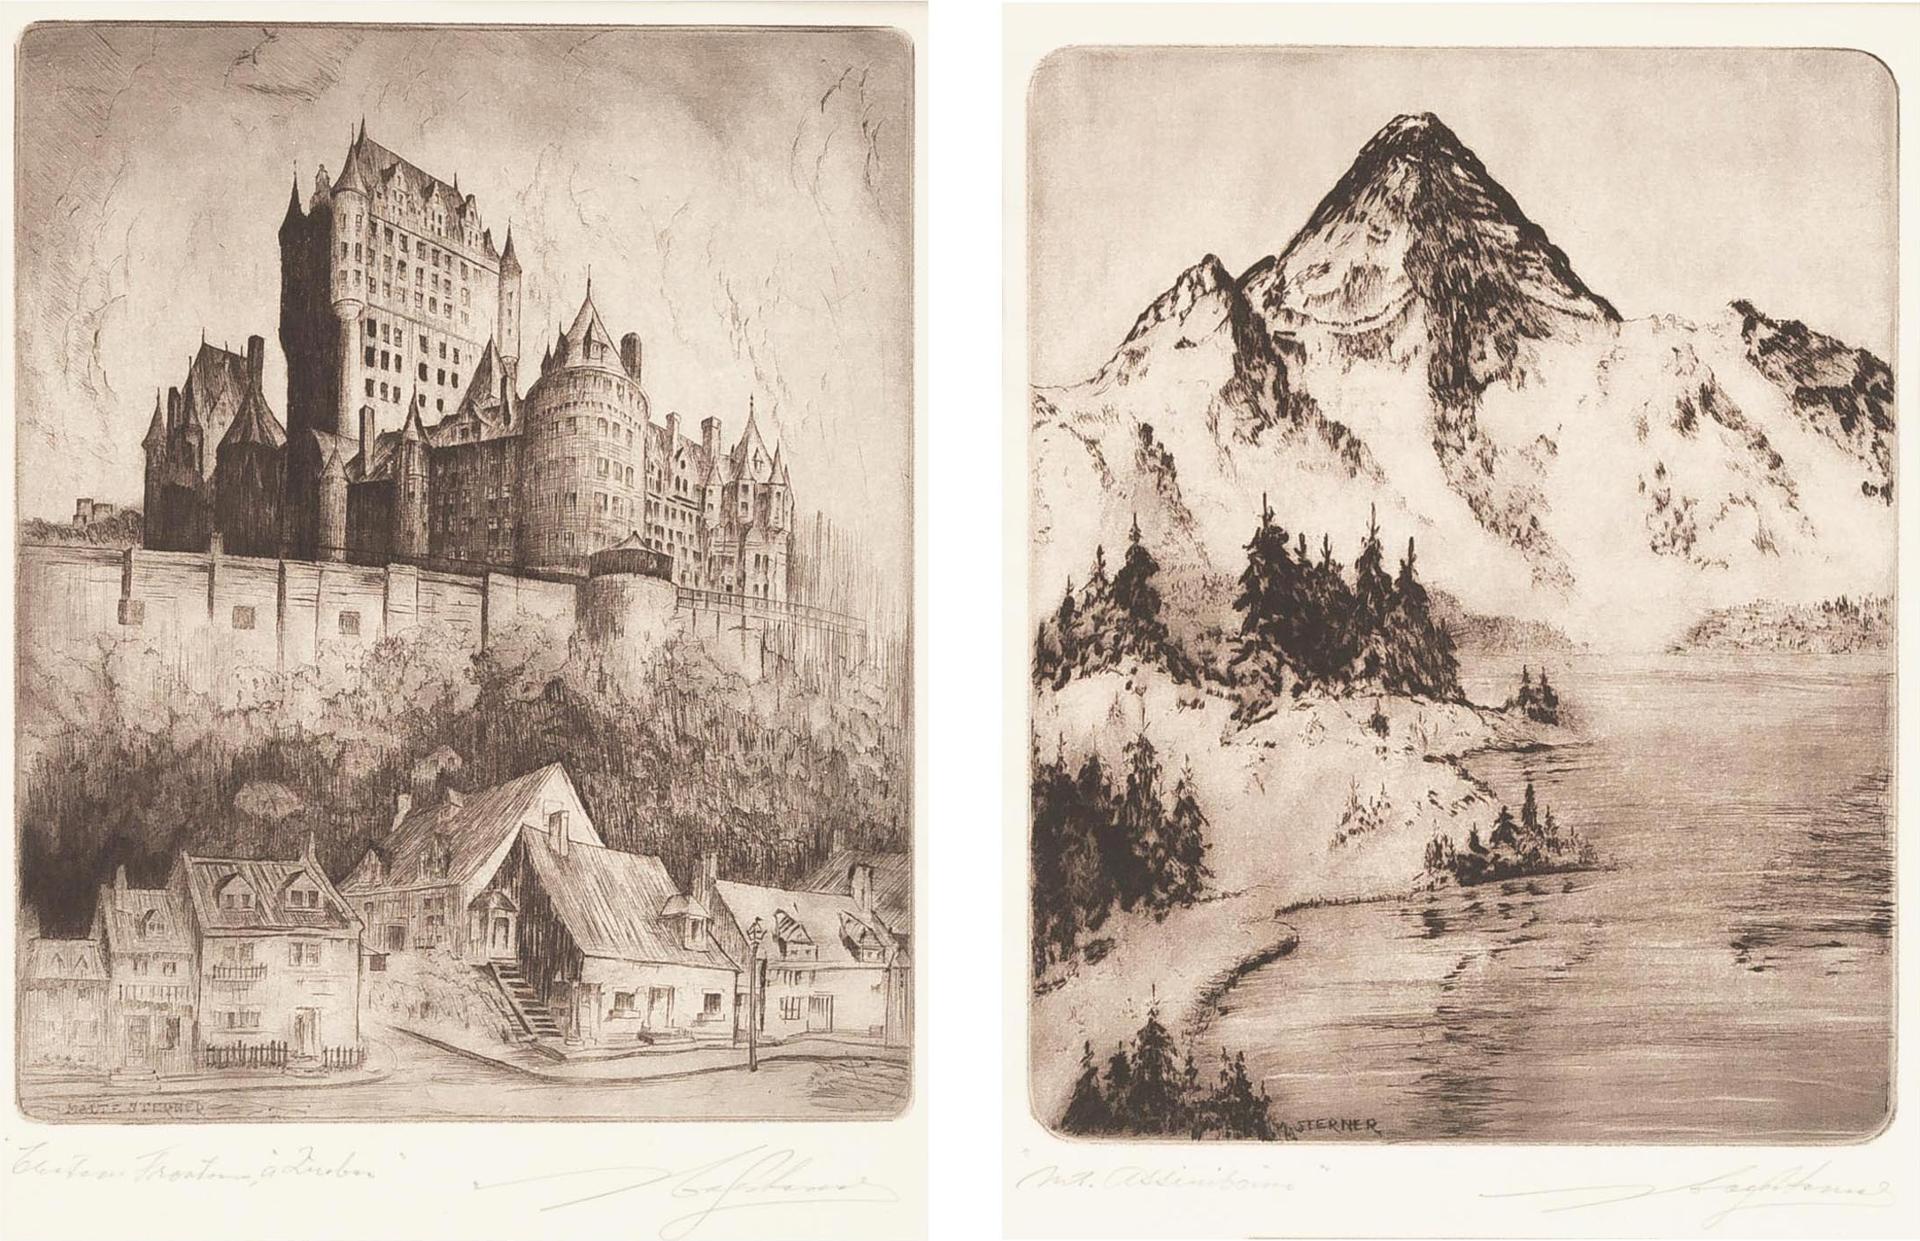 Malte Sterner (1903-1952) - Chateau Frontenac And Mount Assiniboine